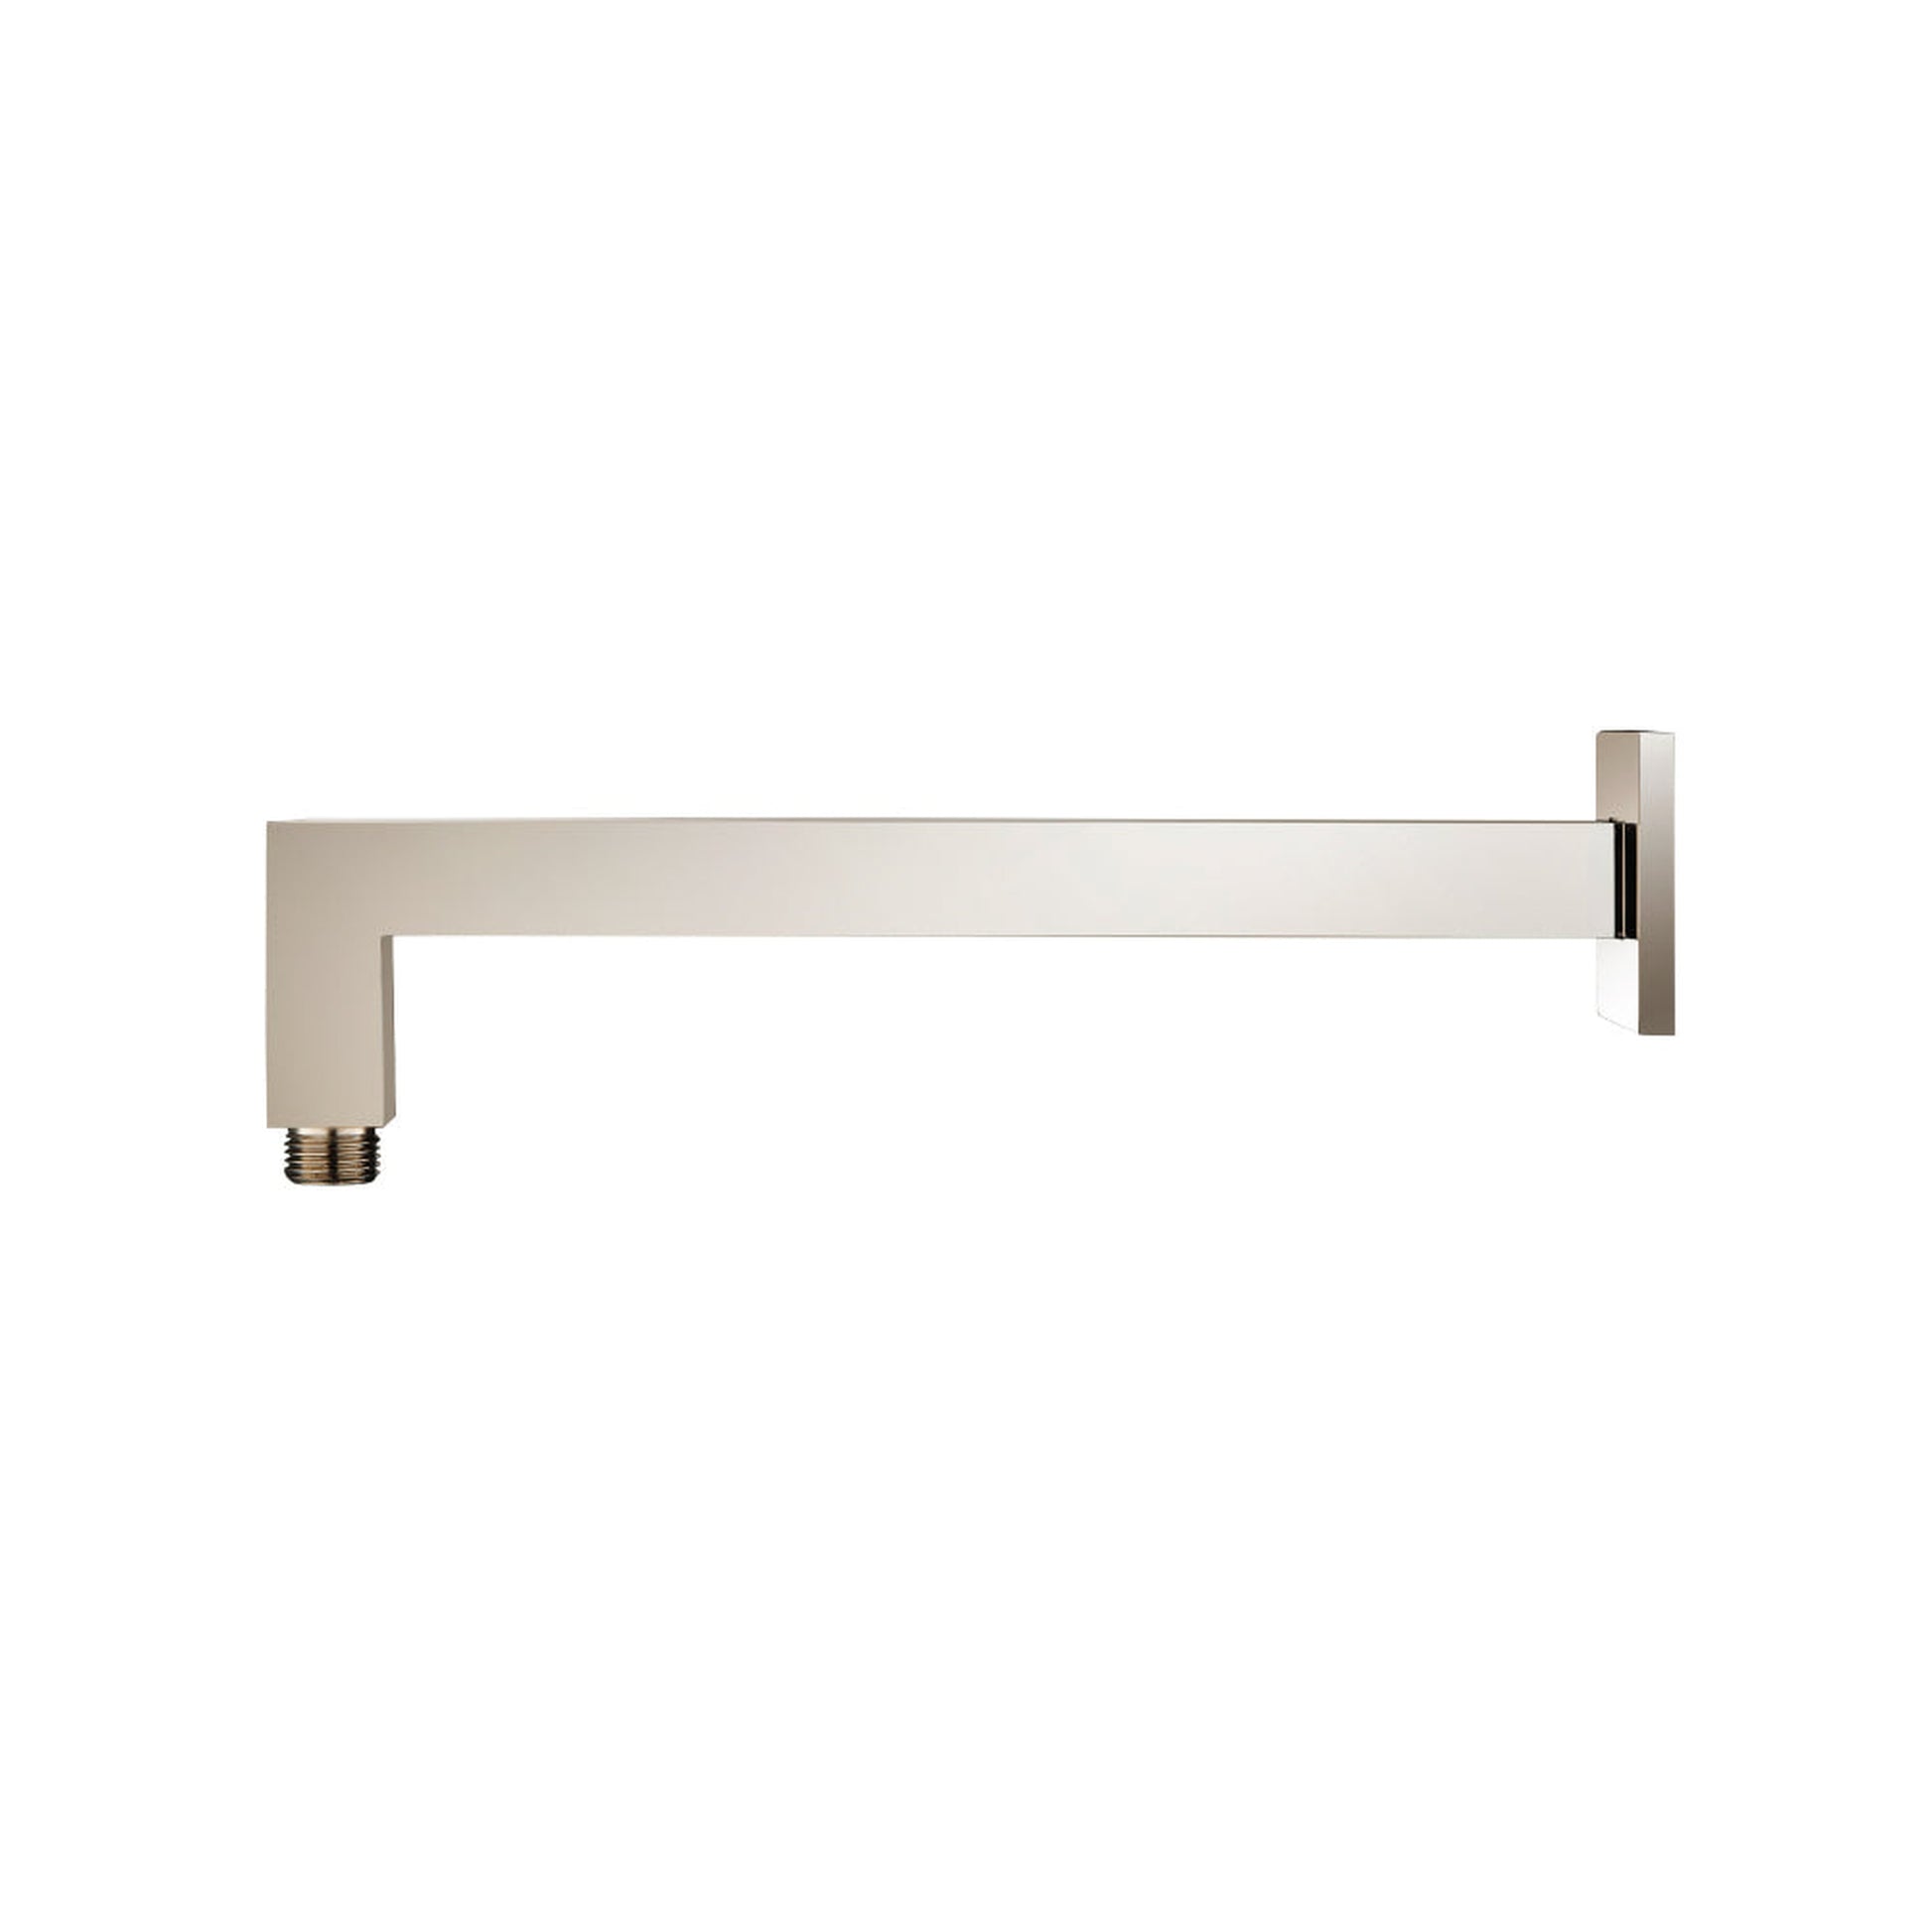 Isenberg Universal Fixtures 12" Polished Nickel PVD Solid Brass Wall-Mounted Shower Arm With Angled Extension and Square Sliding Flange